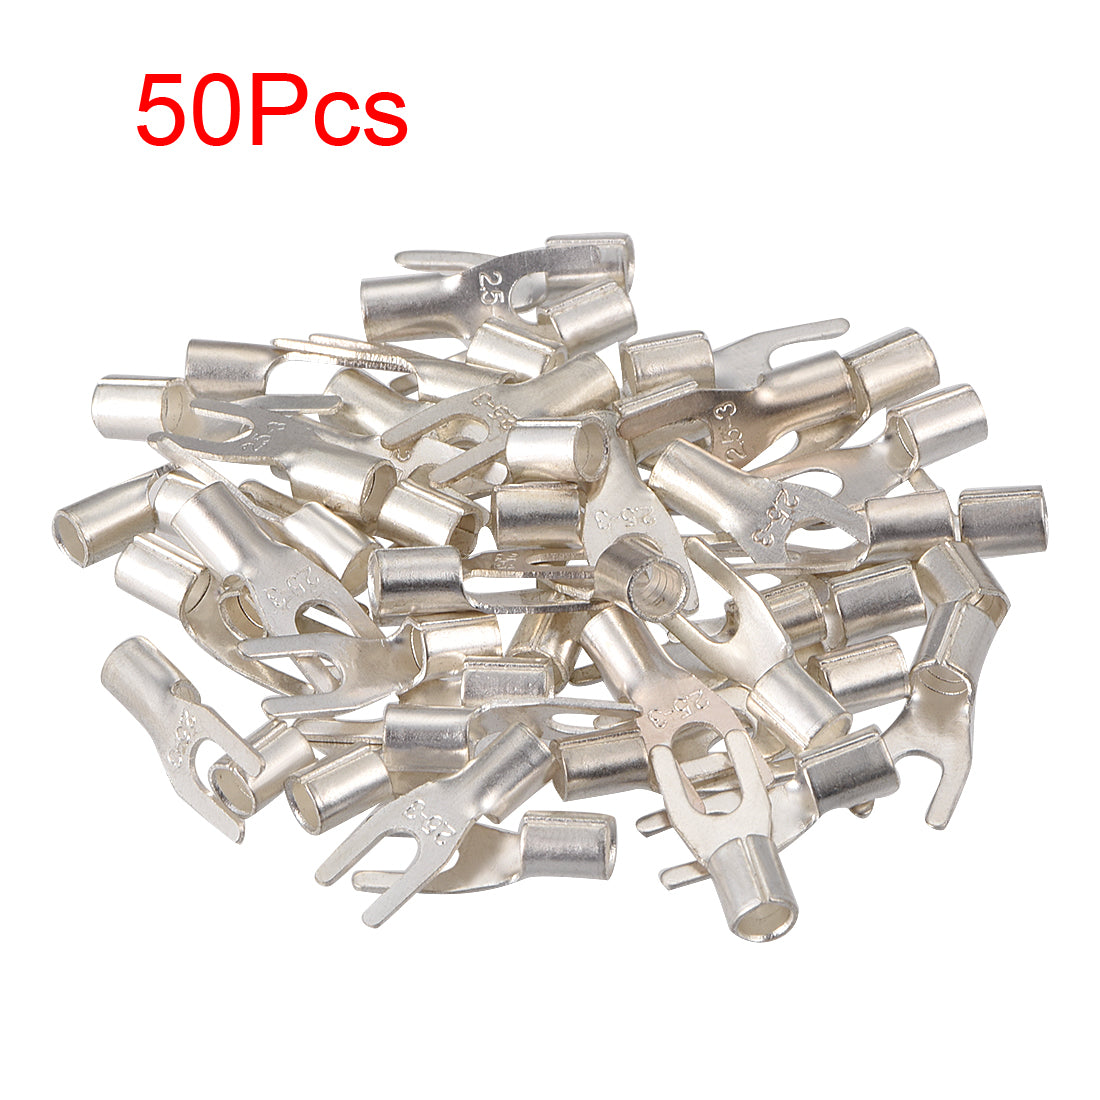 uxcell Uxcell 50Pcs UT2.5-3 Non-Insulated U-Type Brass Crimp Terminals 2-2.5mm2 Wire Connector Silver Tone